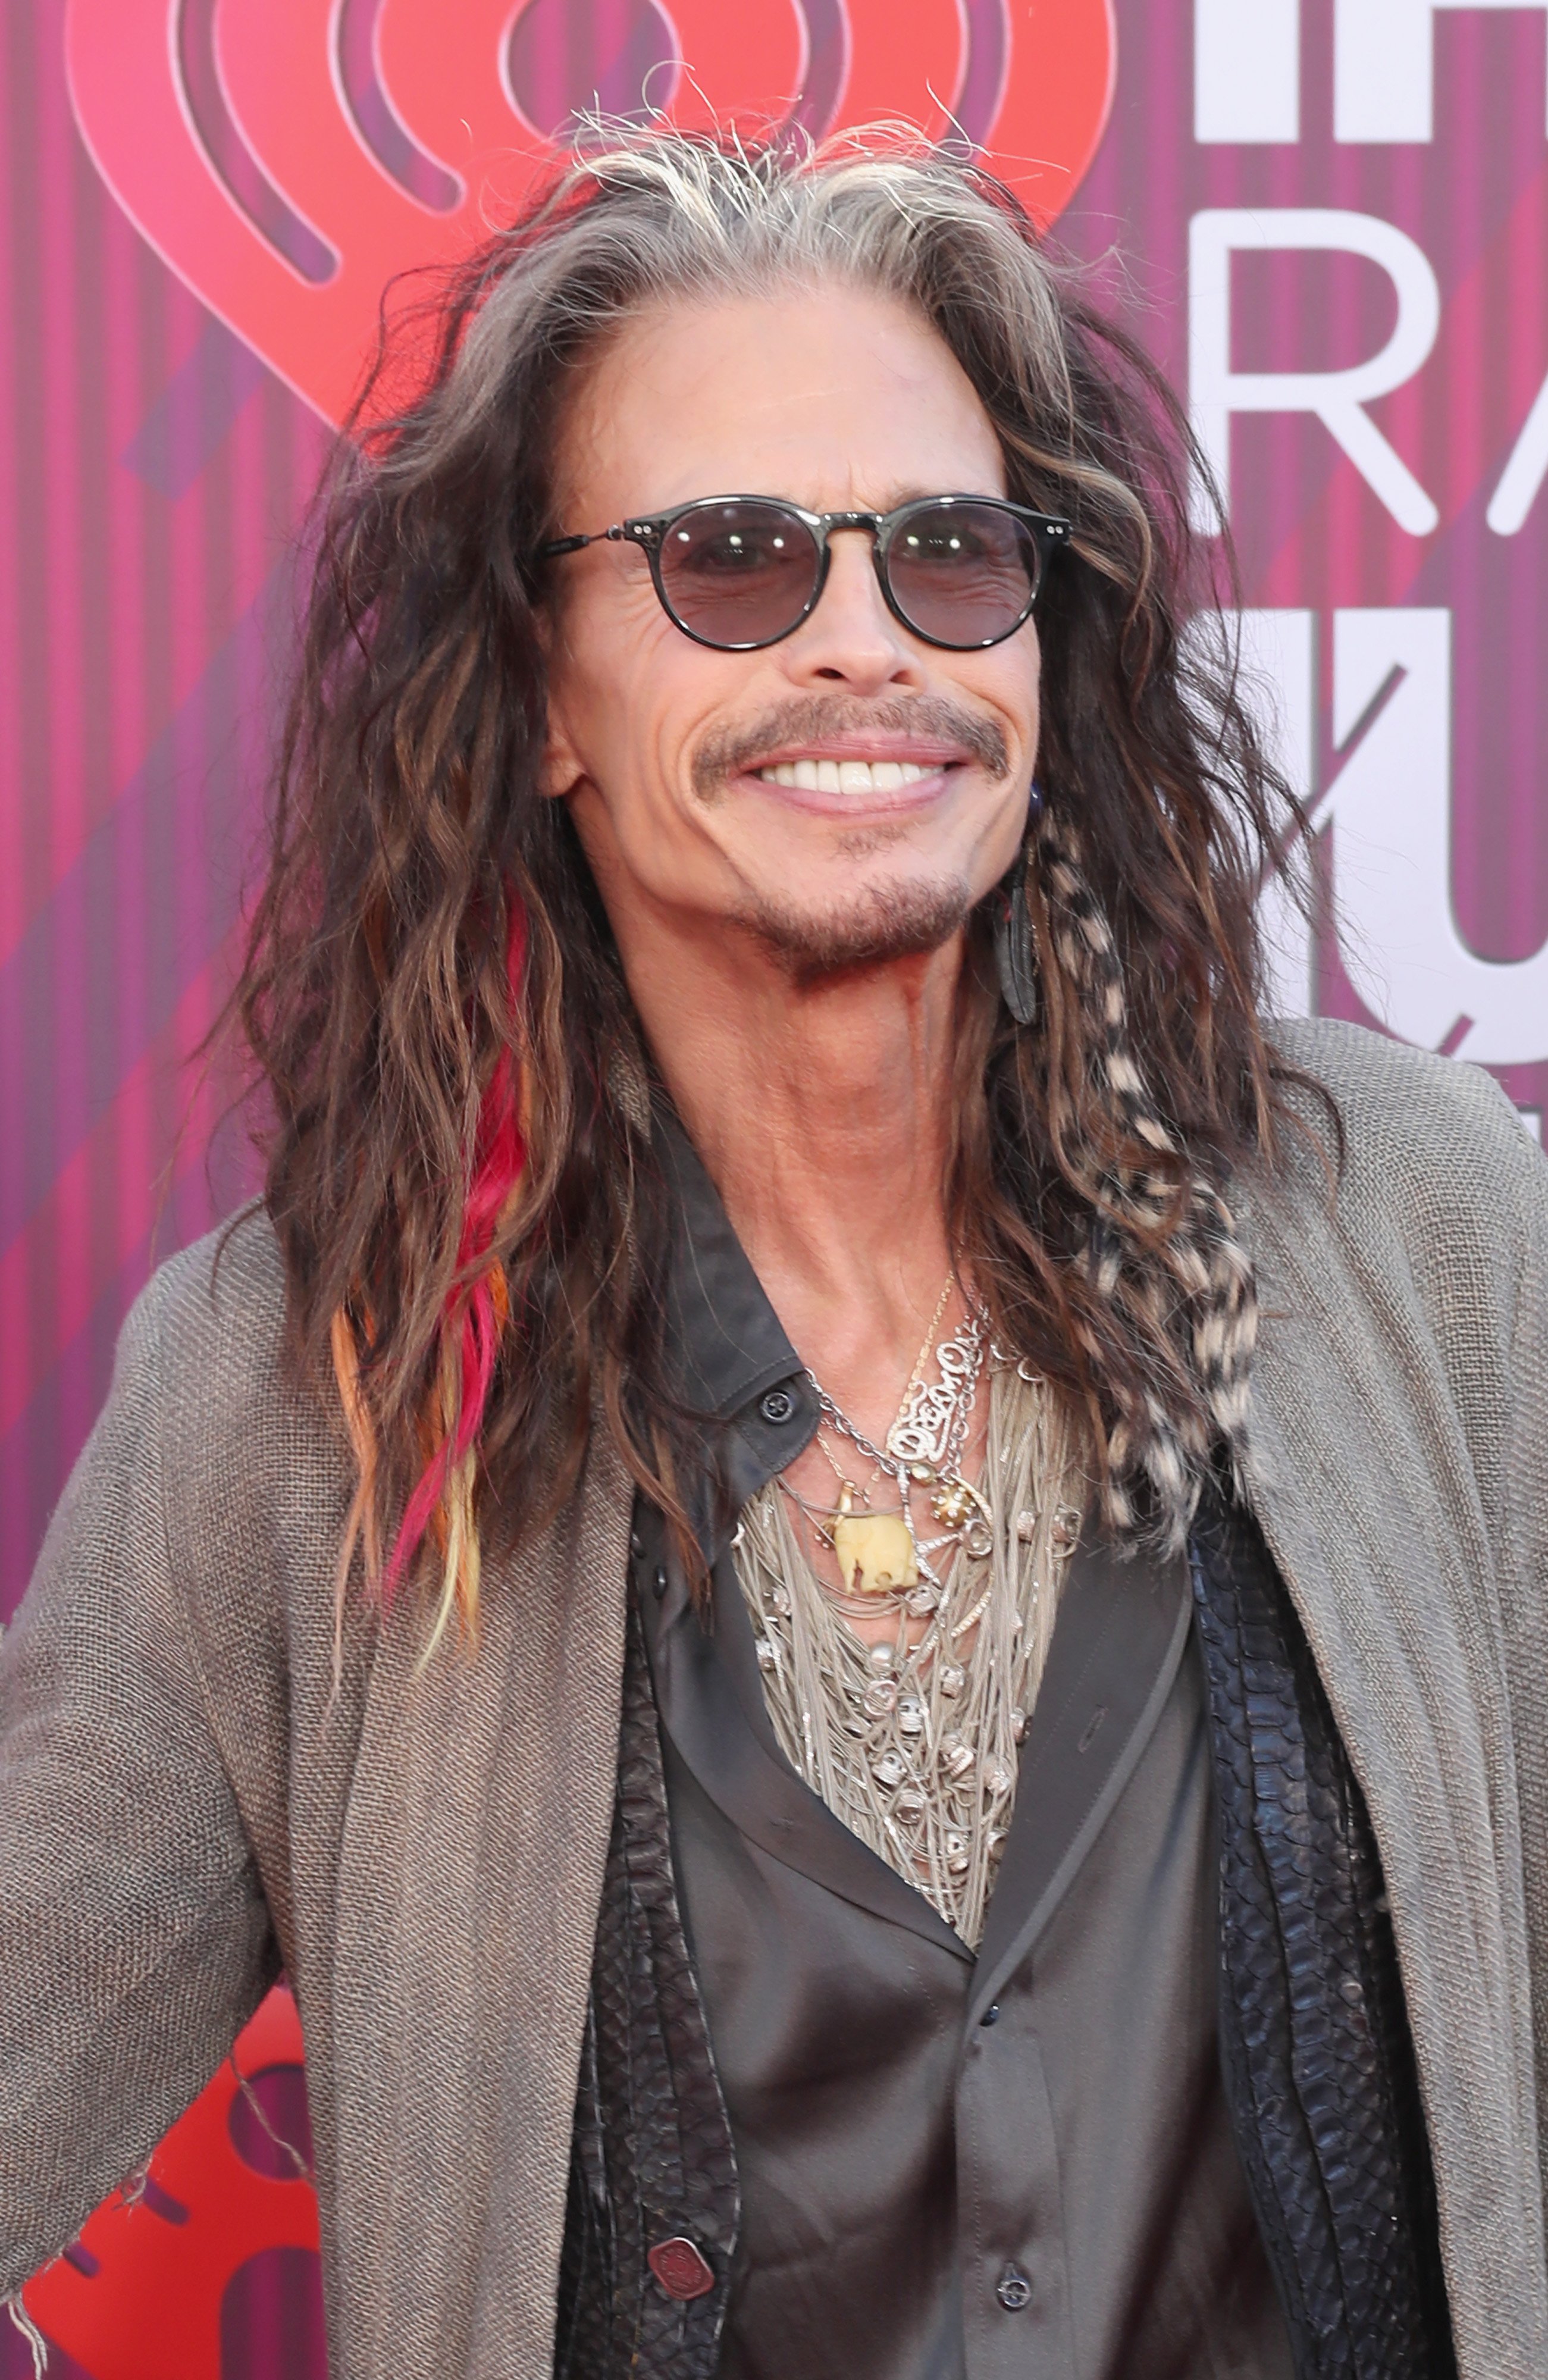 Steven Tyler at the 2019 iHeartRadio Music Awards on March 14, 2019 | Photo: GettyImages